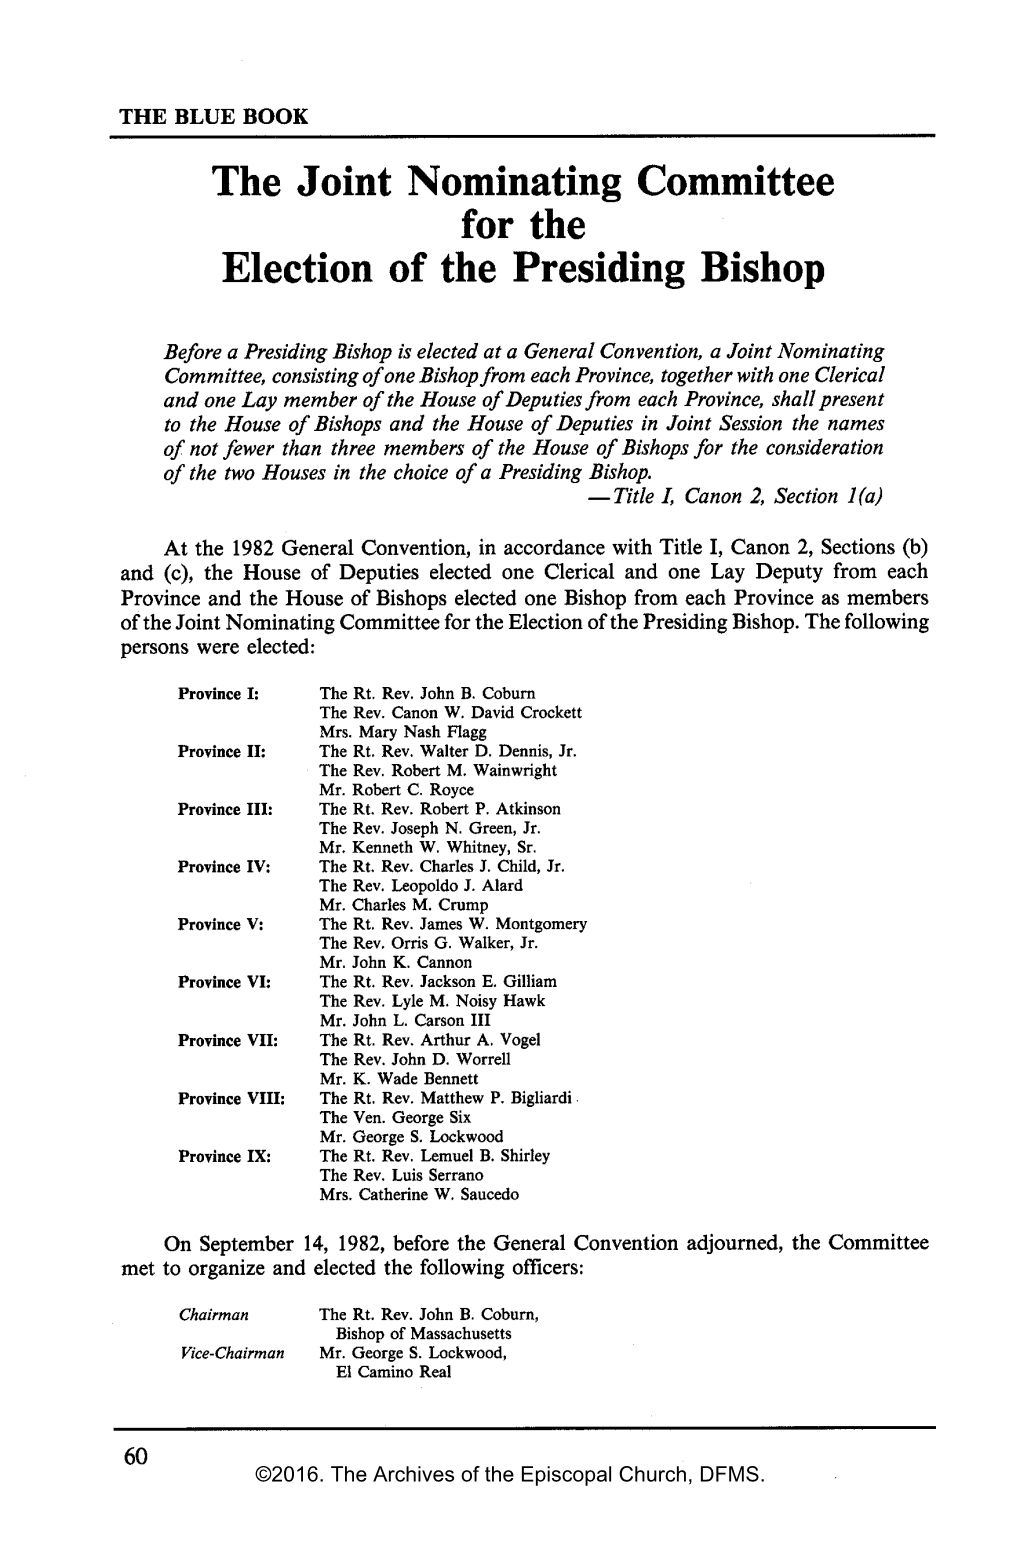 The 1985 Report of the Joint Nominating Committee for The